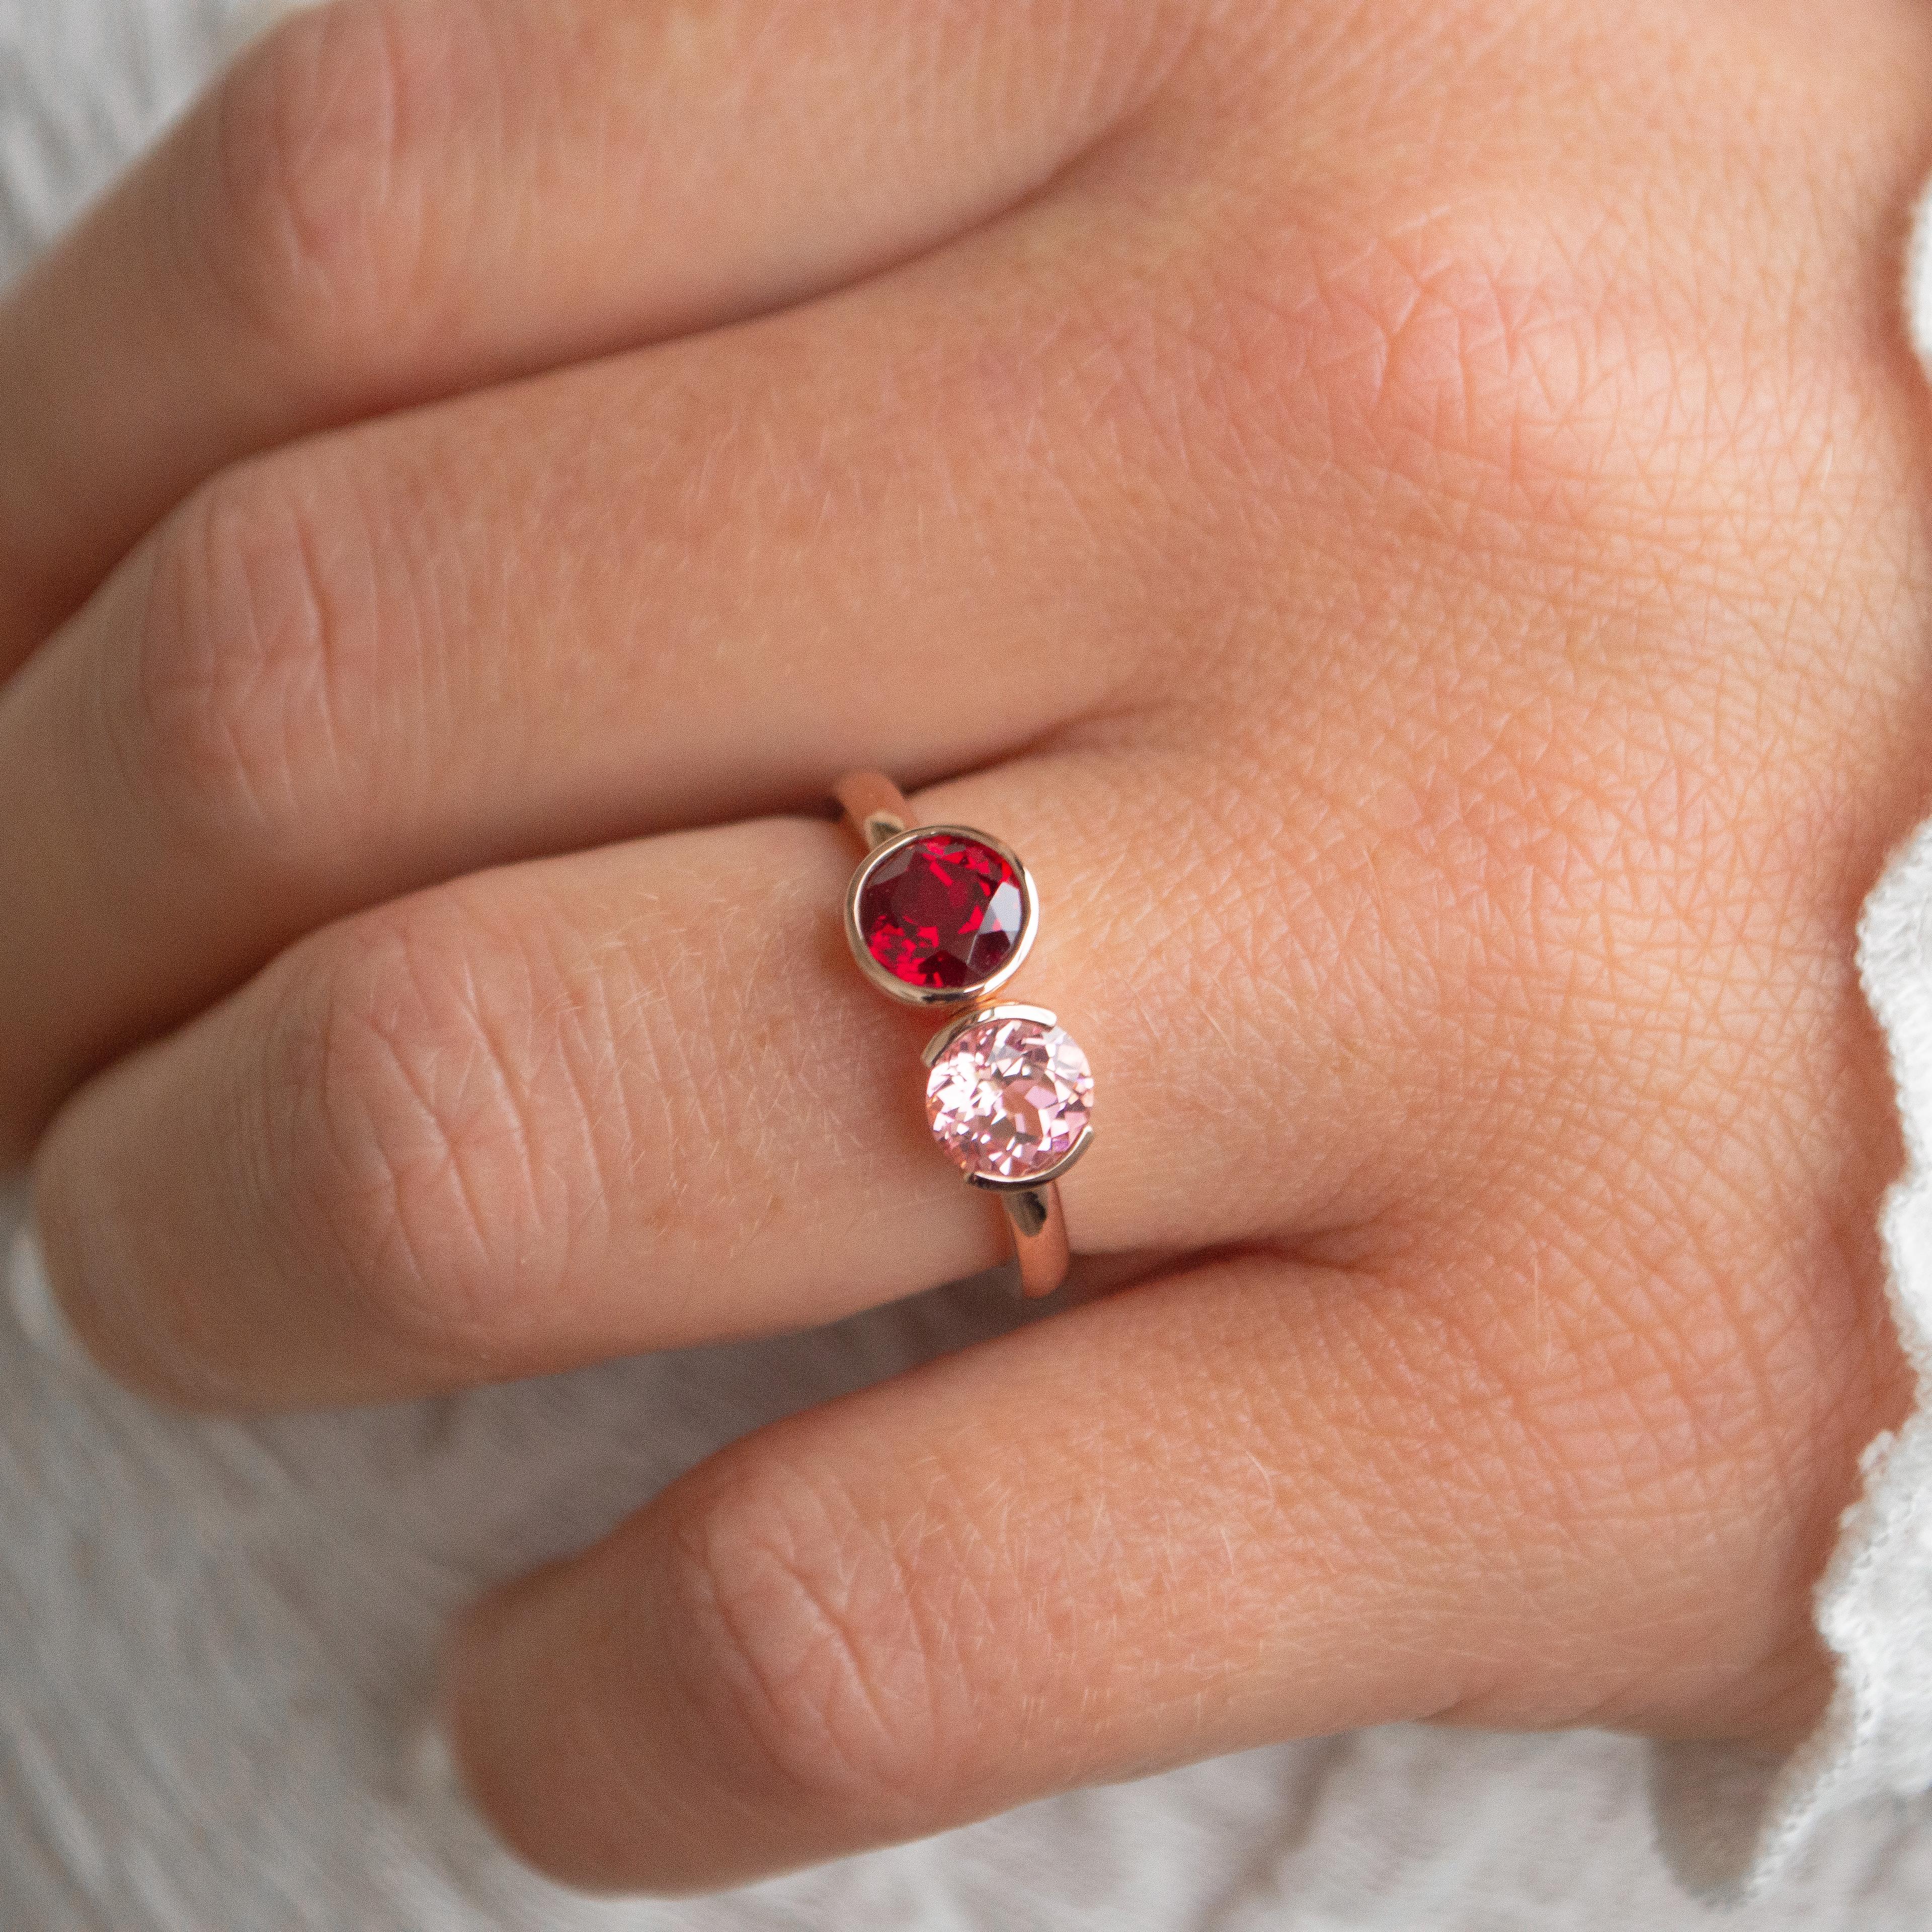 Toi et moi round cut ruby in full bezel and round cut pink sapphire in half bezel engagement ring in a yellow gold band.